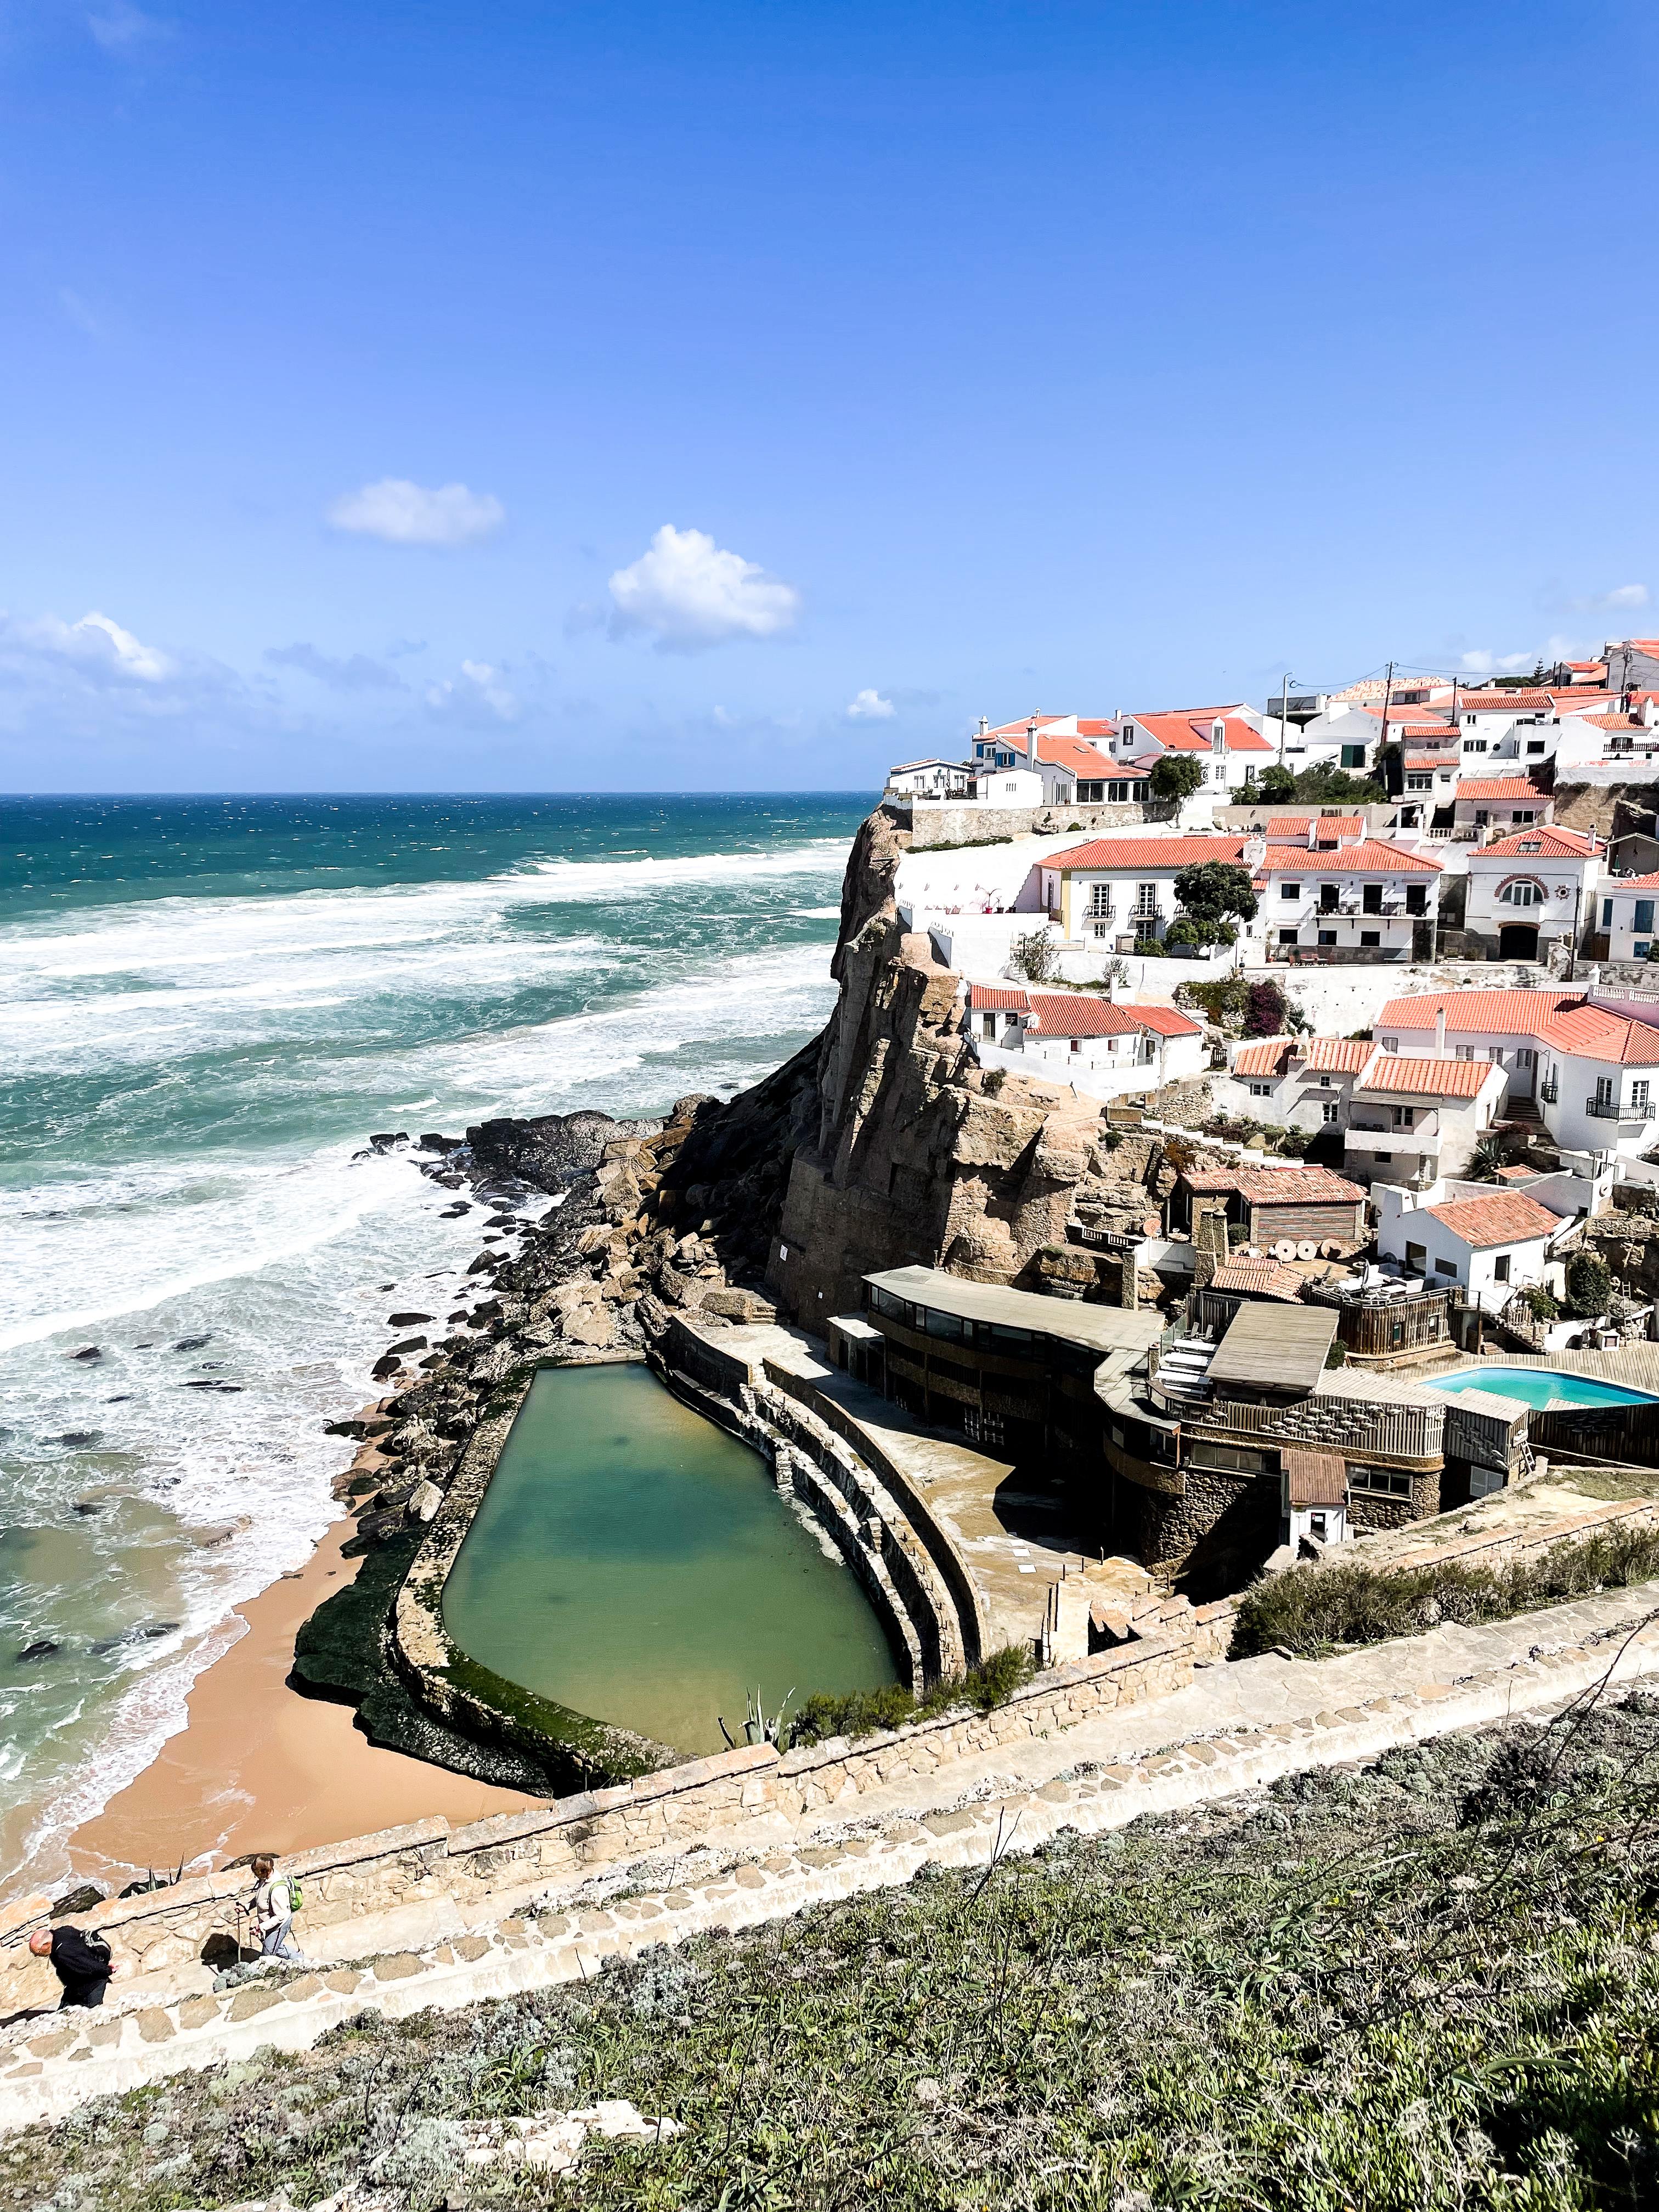 white wash village by ocean on hilltop in portugal